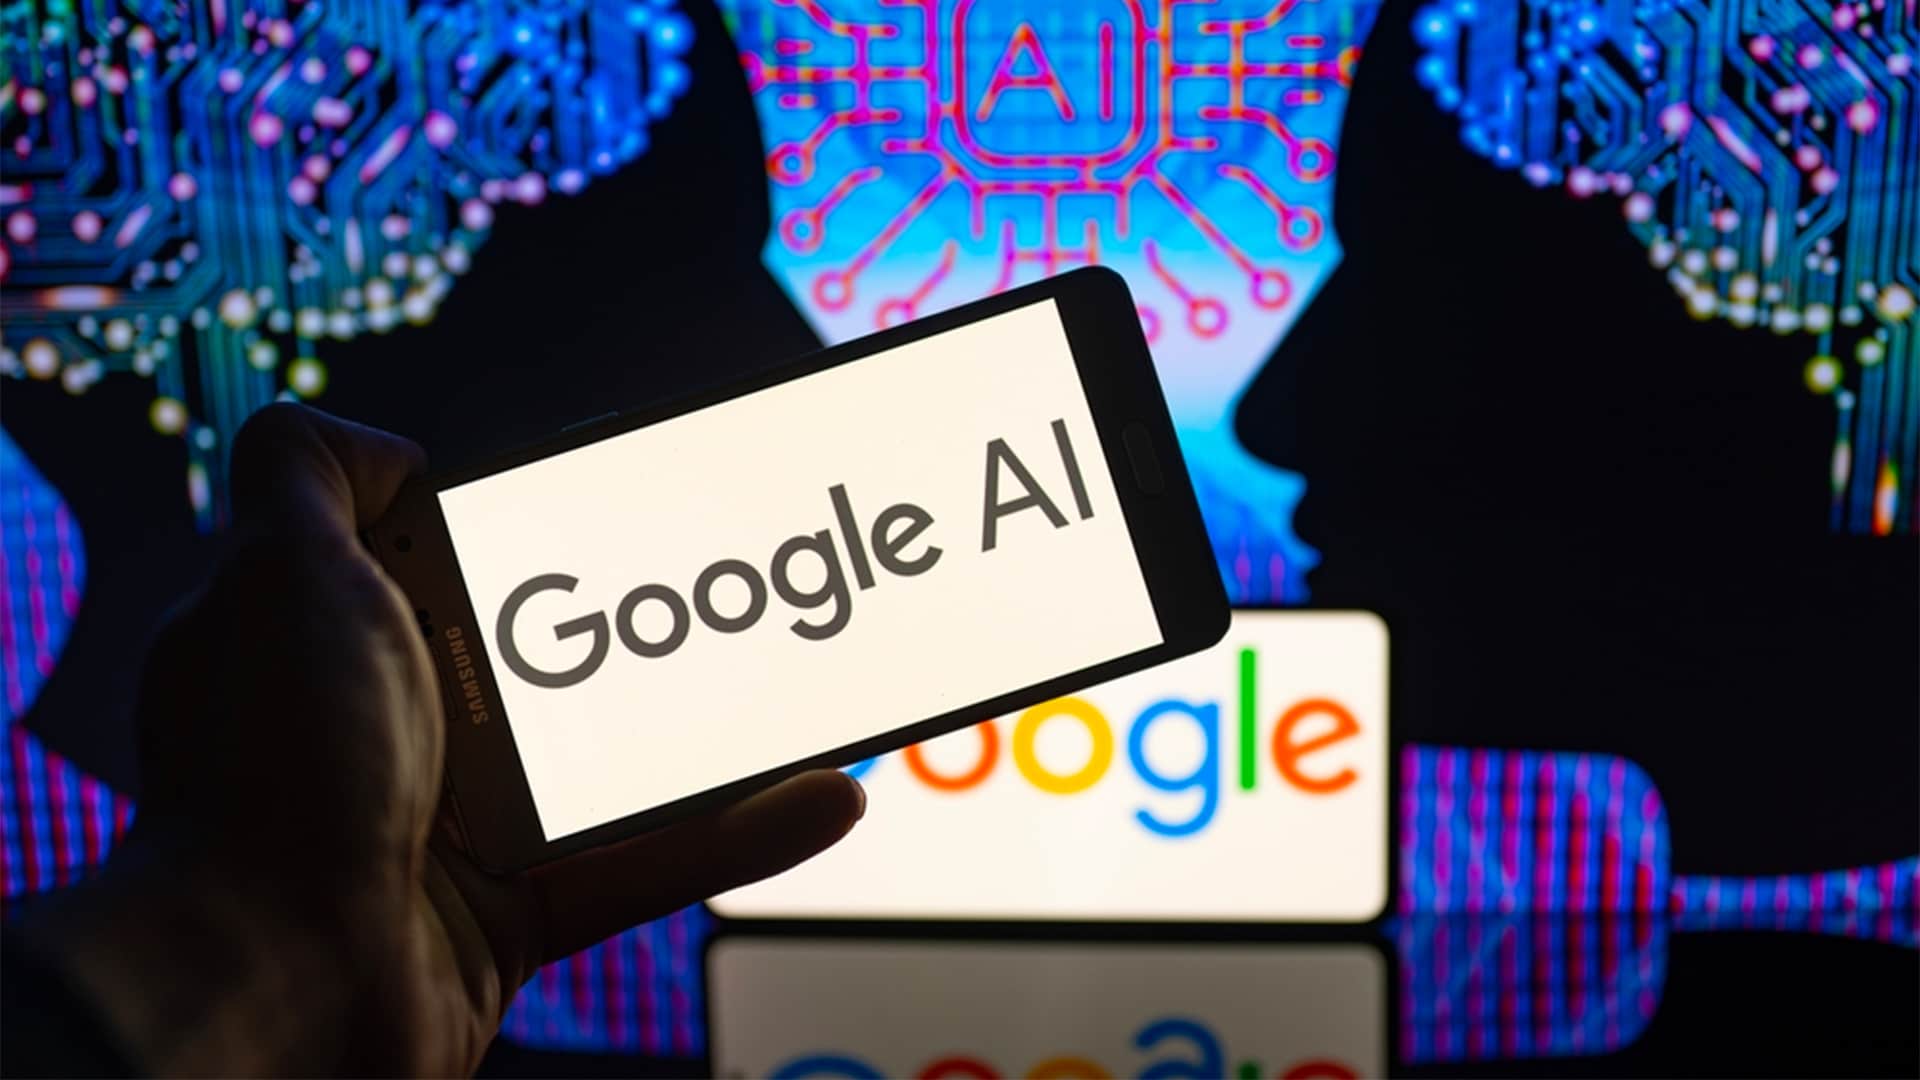 Amid mass layoffs, Google's DeepMind AI scientists may leave and start